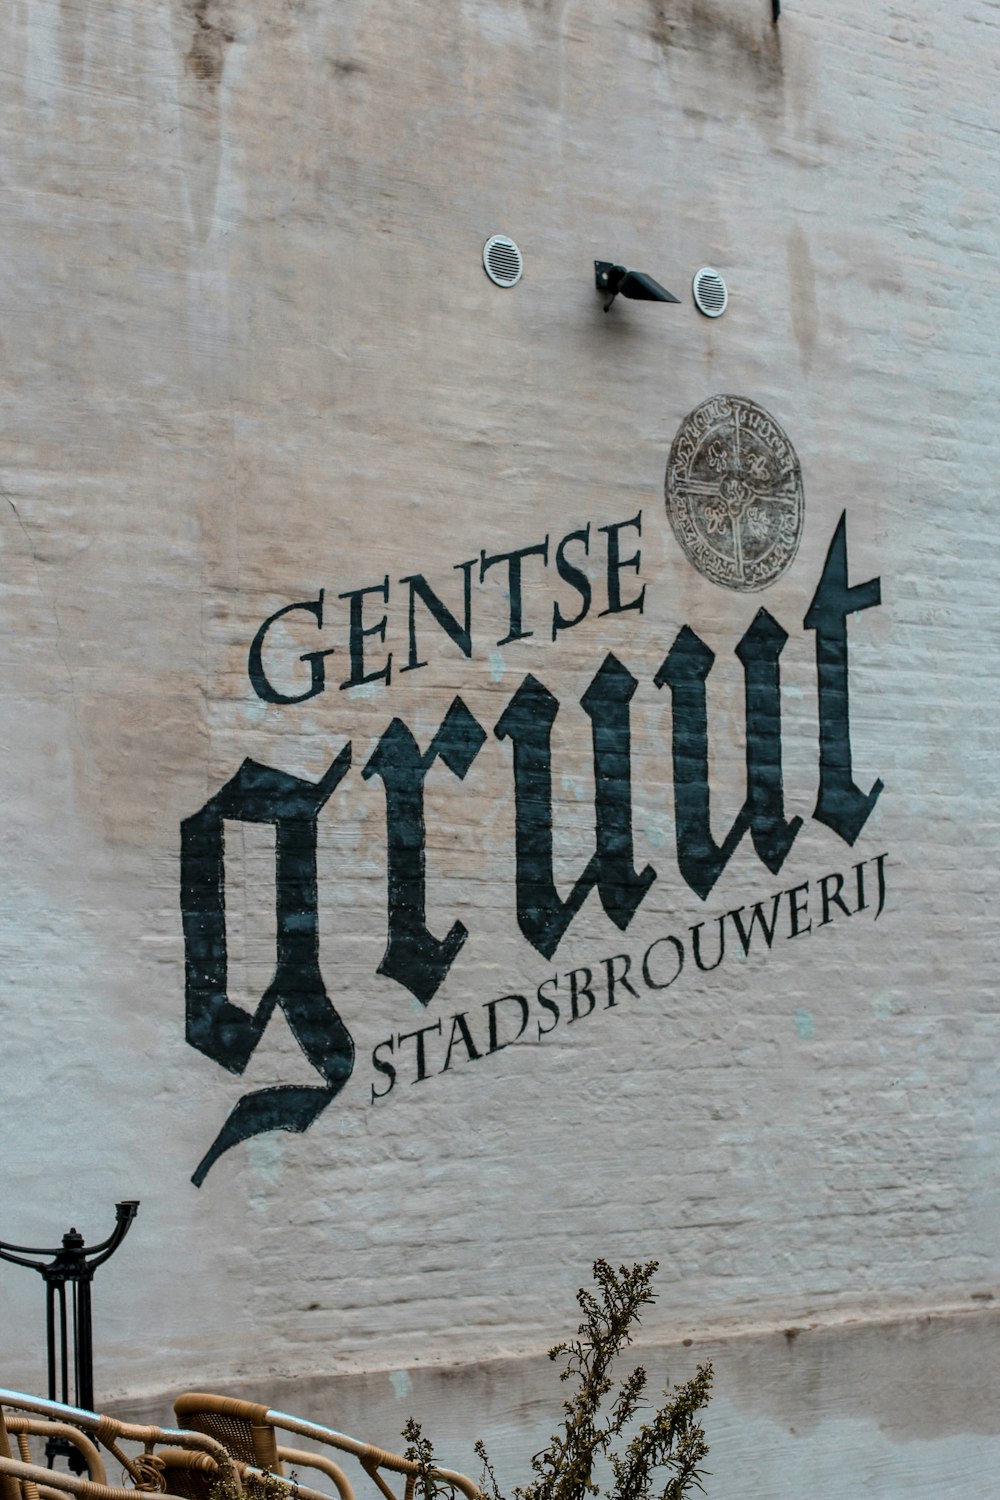 a sign on the side of a building that says gentse graut